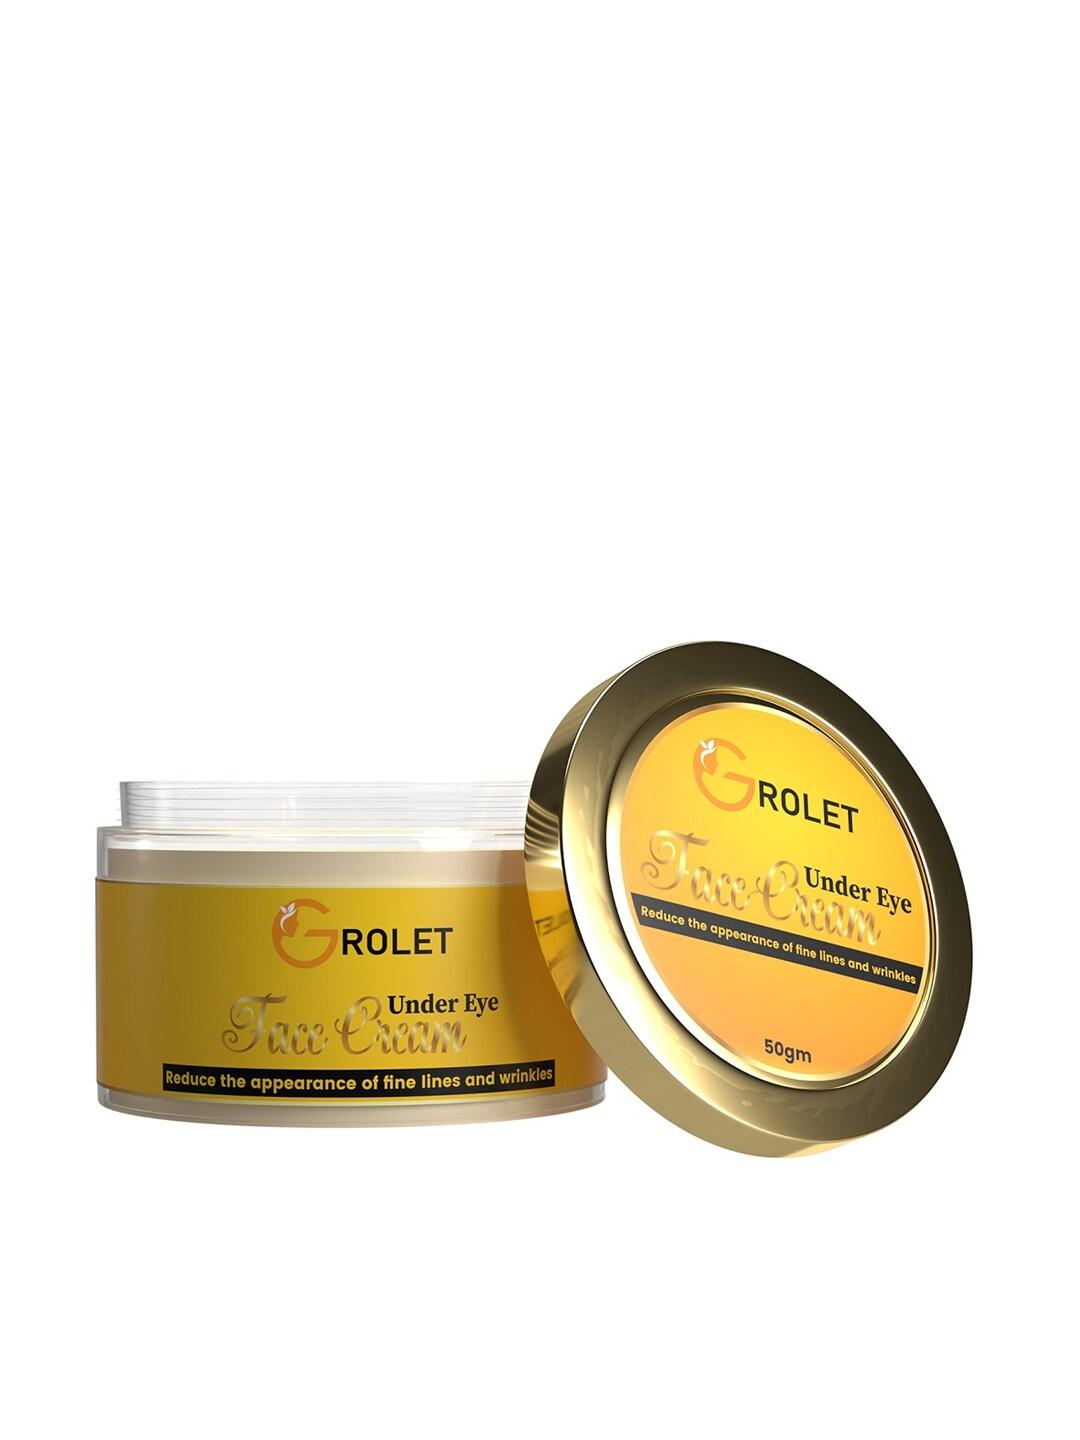 GROLET Hydrating Natural Under Eye Cream for Puffy Dark Circles - 50g